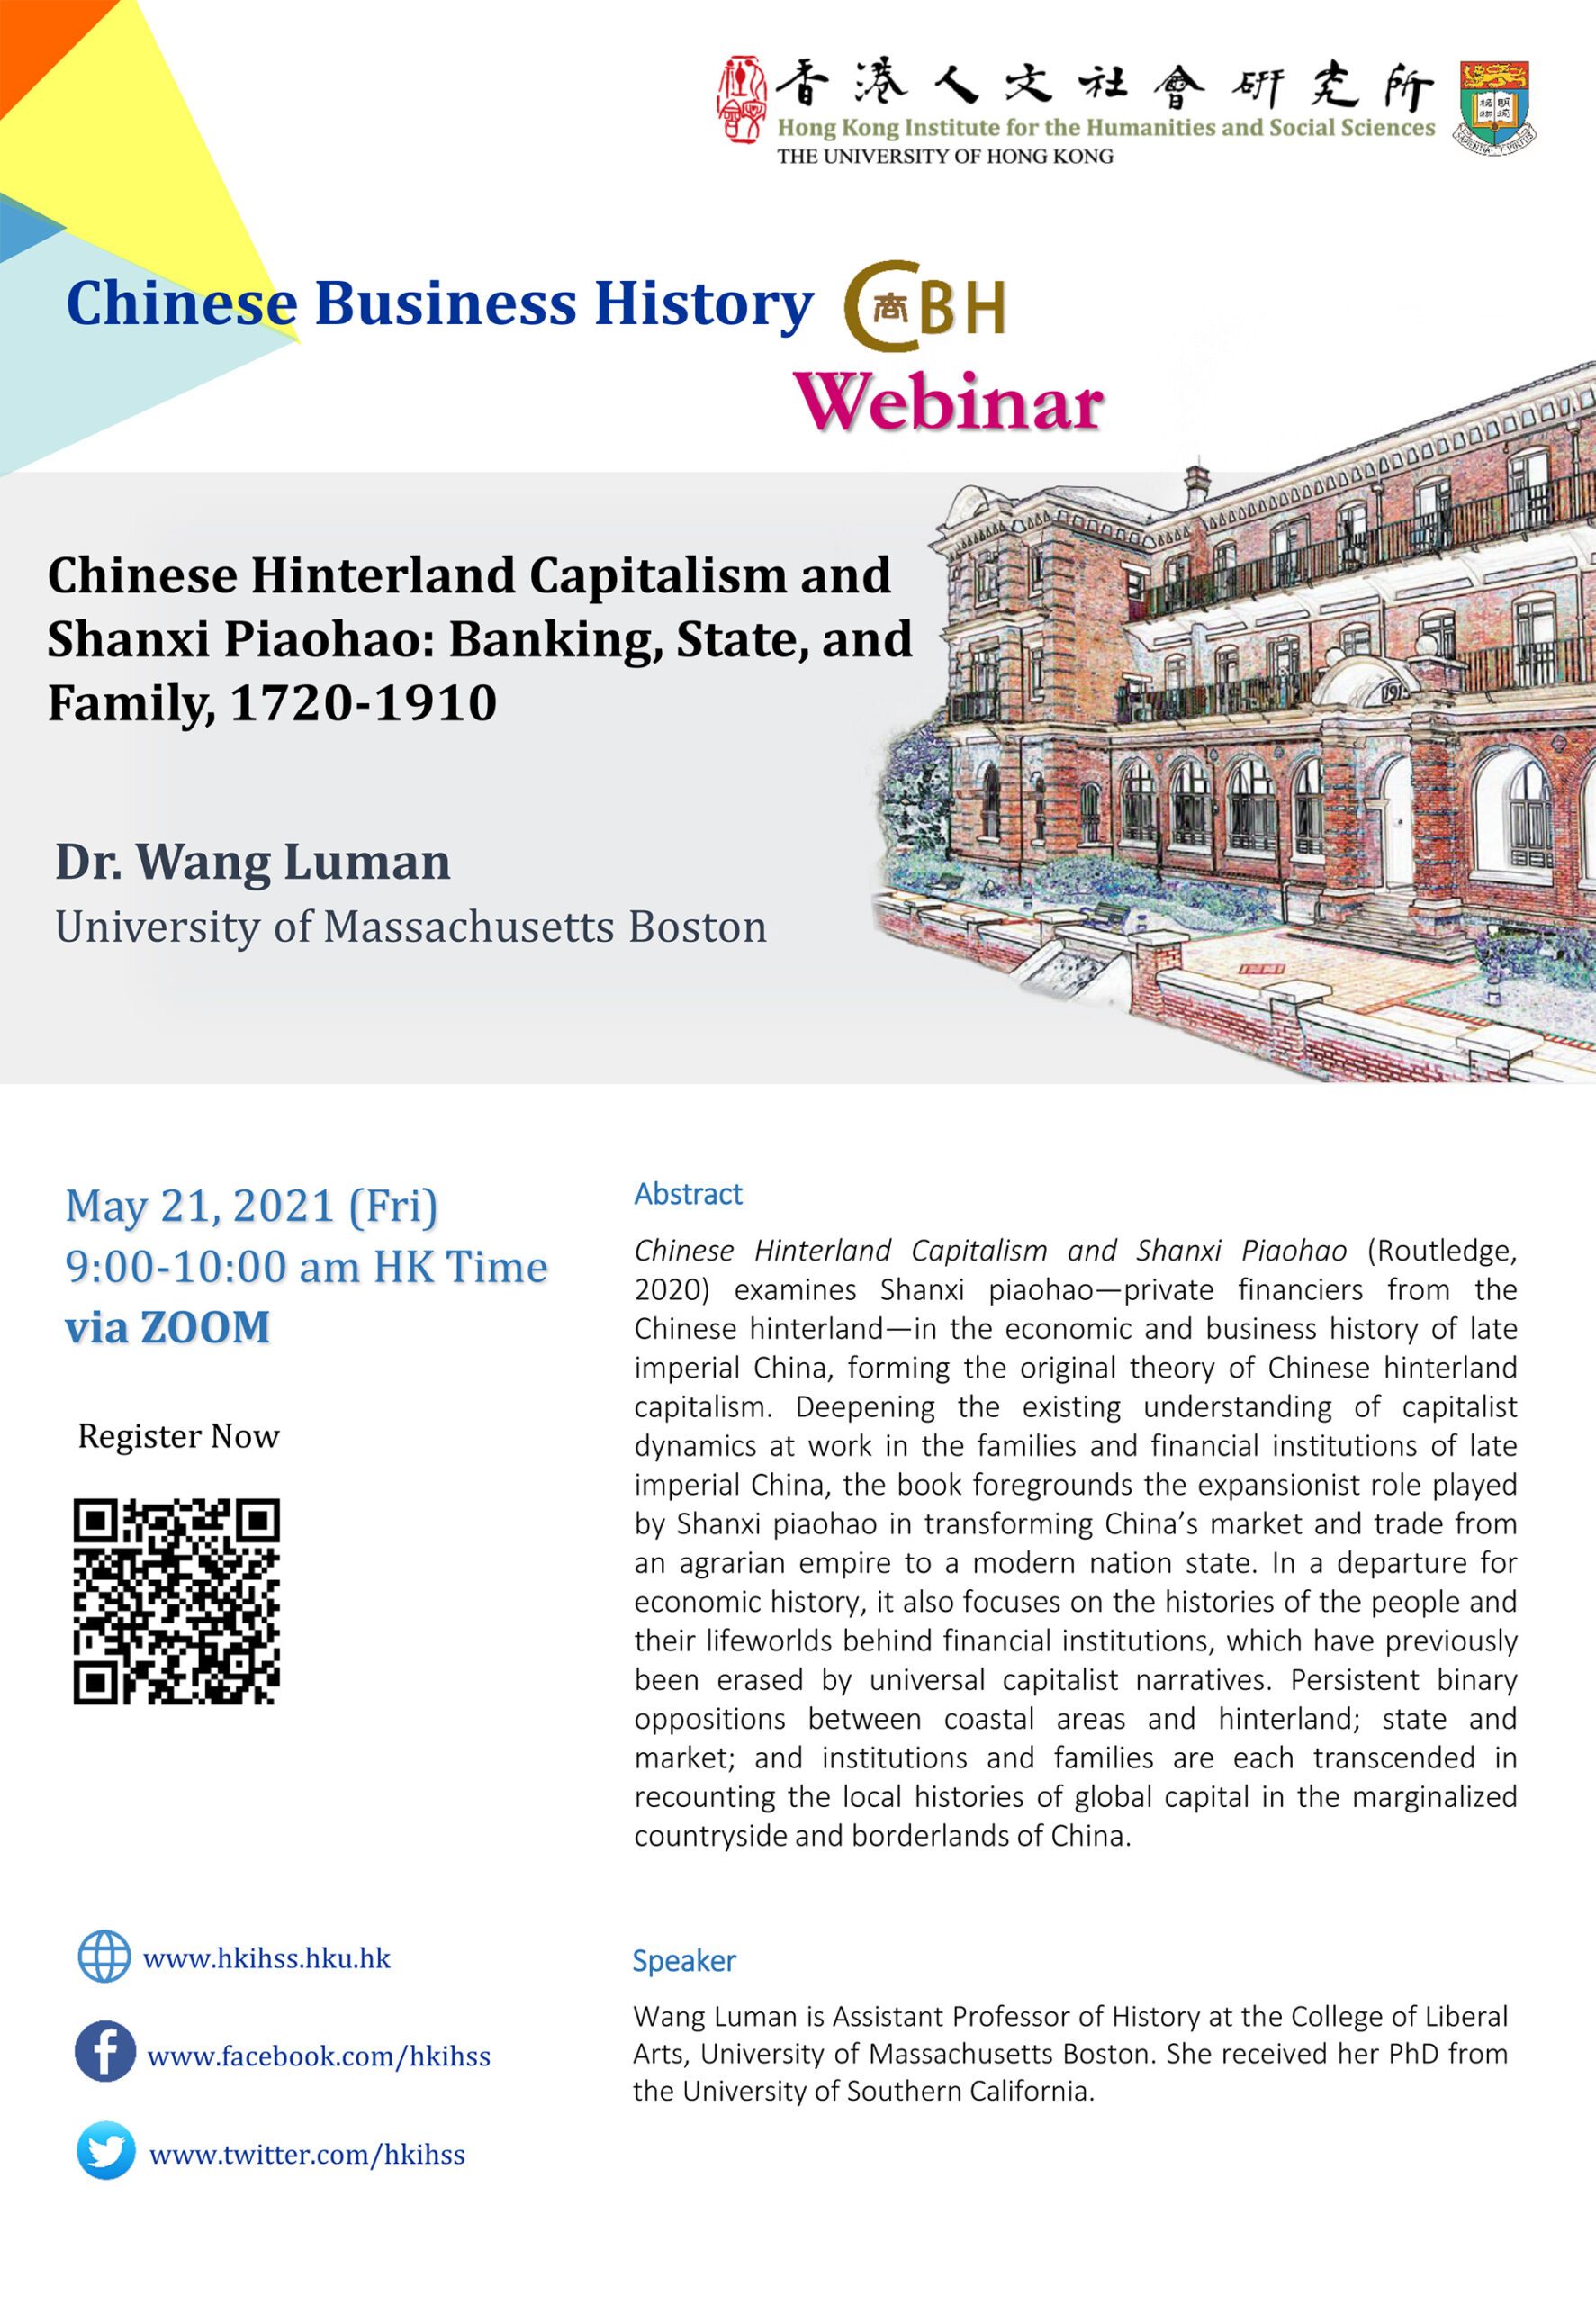 Chinese Business History Webinar on “Chinese Hinterland Capitalism and Shanxi Piaohao: Banking, State, and Family, 1720-1910” by Dr. Wang Luman (May 21, 2021)